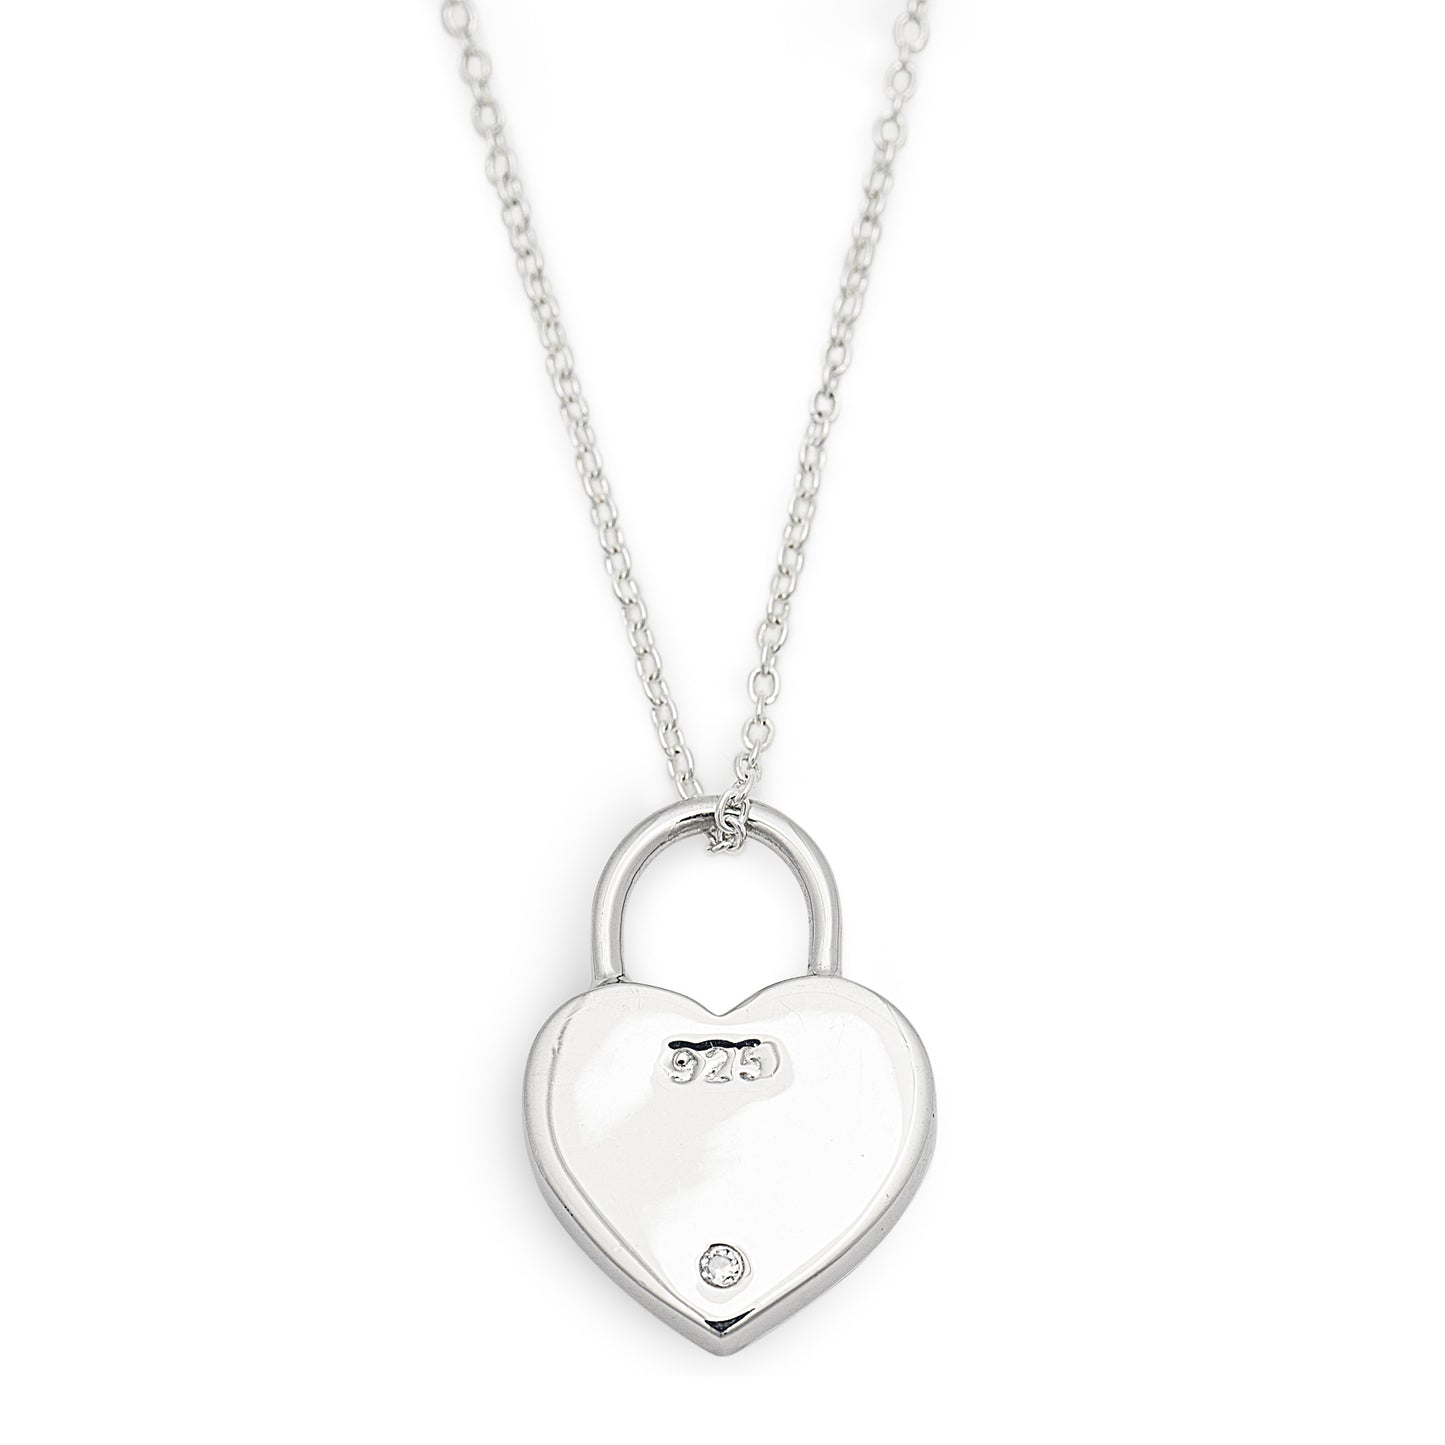 Locked Secrets Necklace - Dainty Heart shaped Padlock necklace stamped with 925 Sterling Silver and Cubic Zirconia. Worldwide shipping. Affordable luxury jewellery by Bellagio & Co.